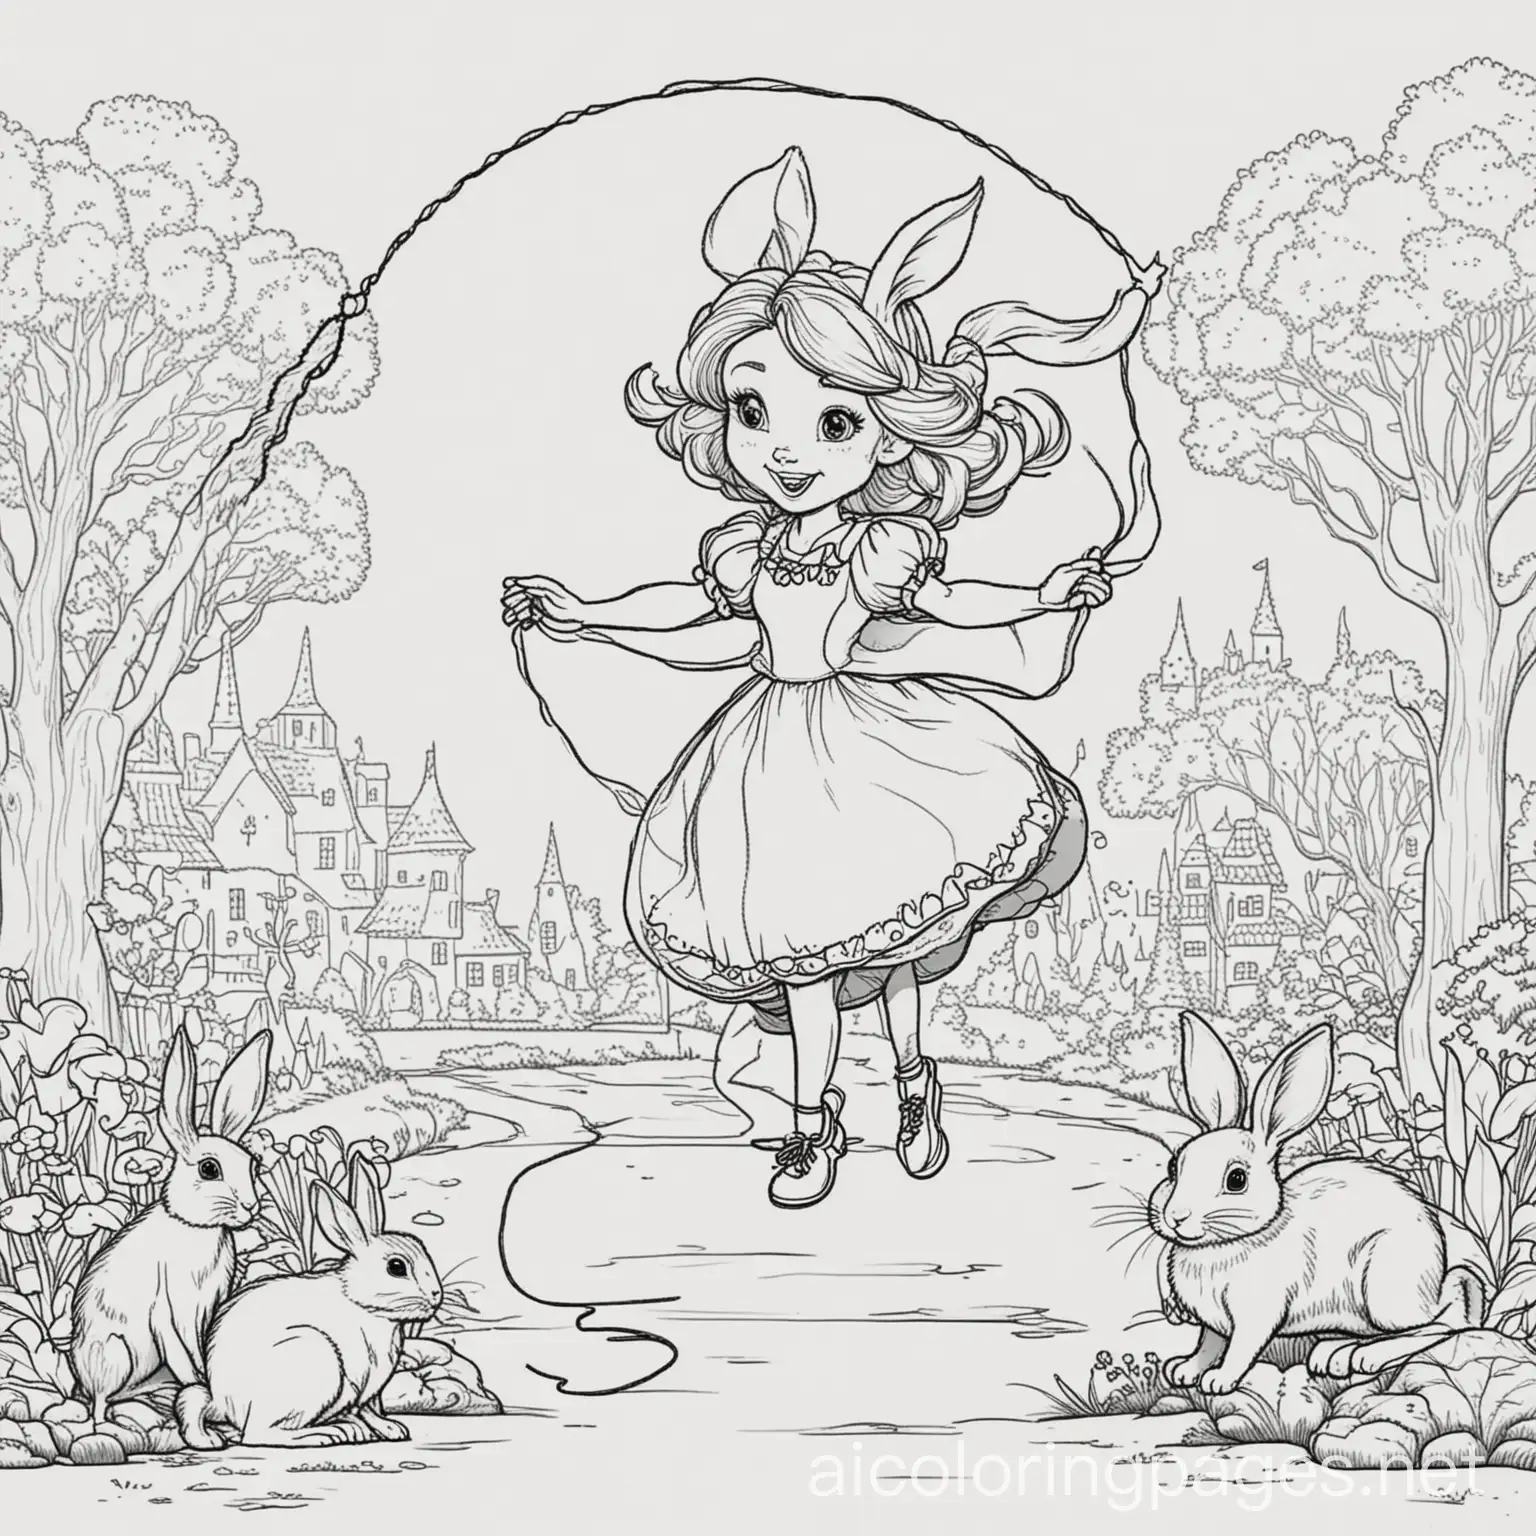 Cartoon-Cinderella-Jumping-Rope-with-Rabbits-and-Mice-Coloring-Page